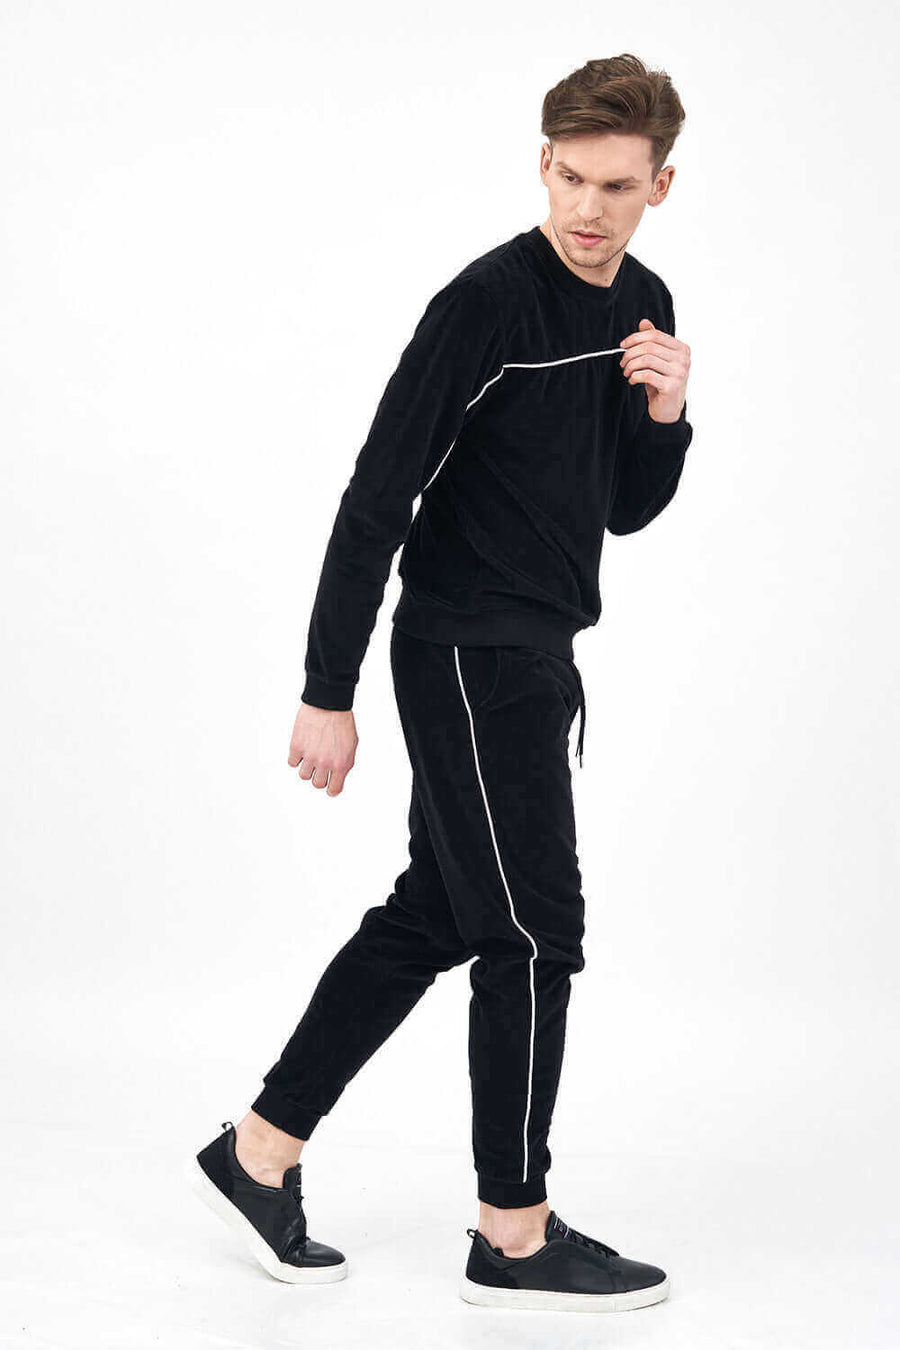 Side running Posture of Velour Men's Tracksuit Set with contrast Piping